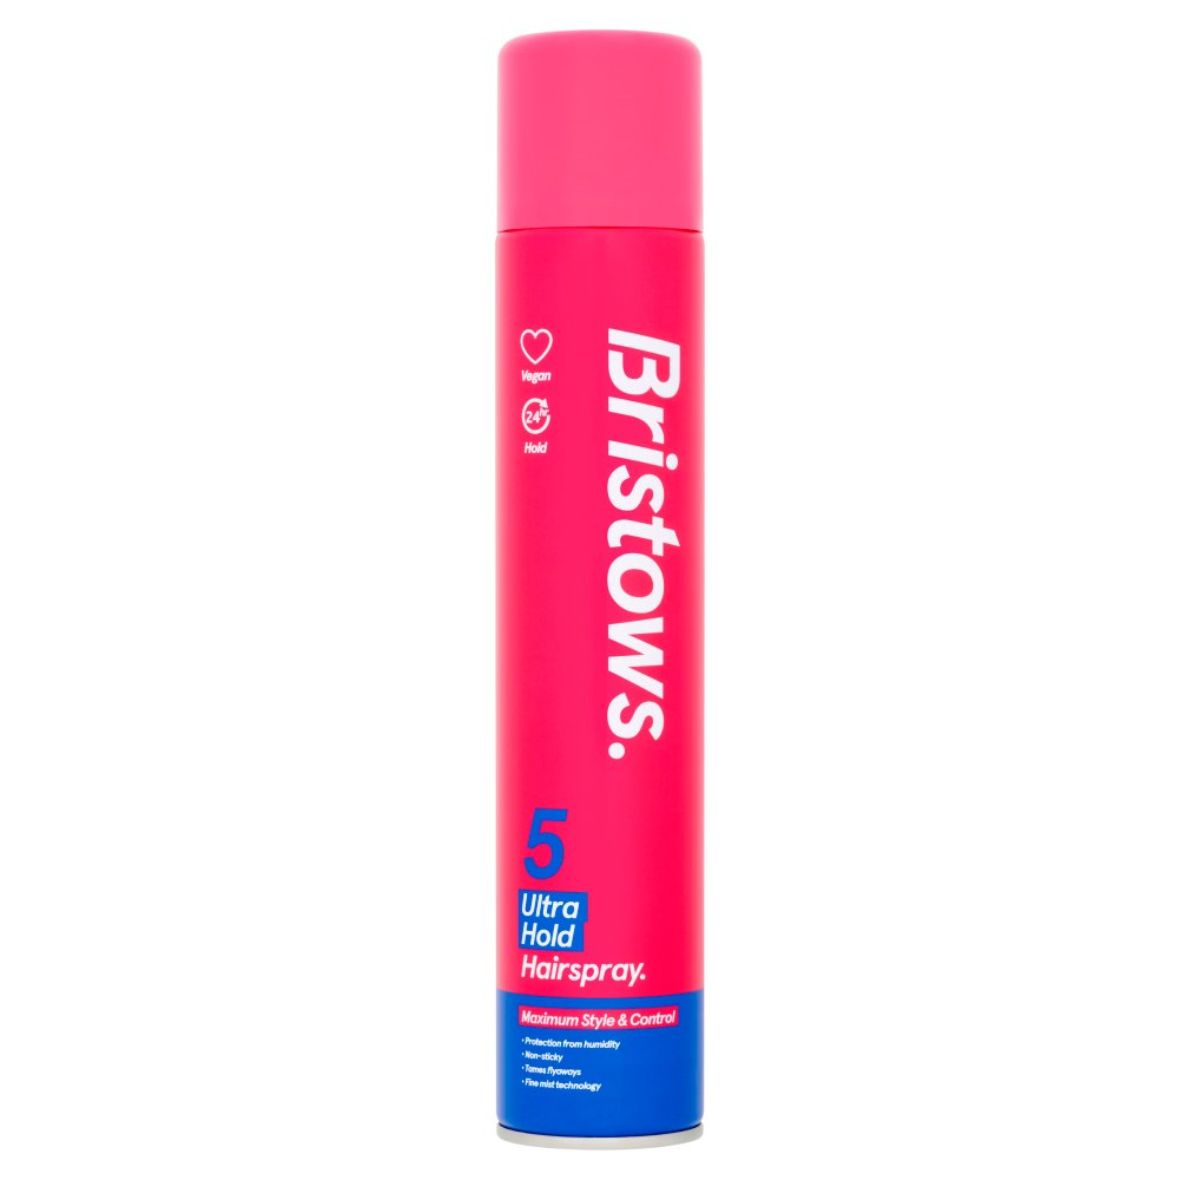 A pink bottle of Bristows - 5 Ultra Hold Hairspray - 400ml on a white background.